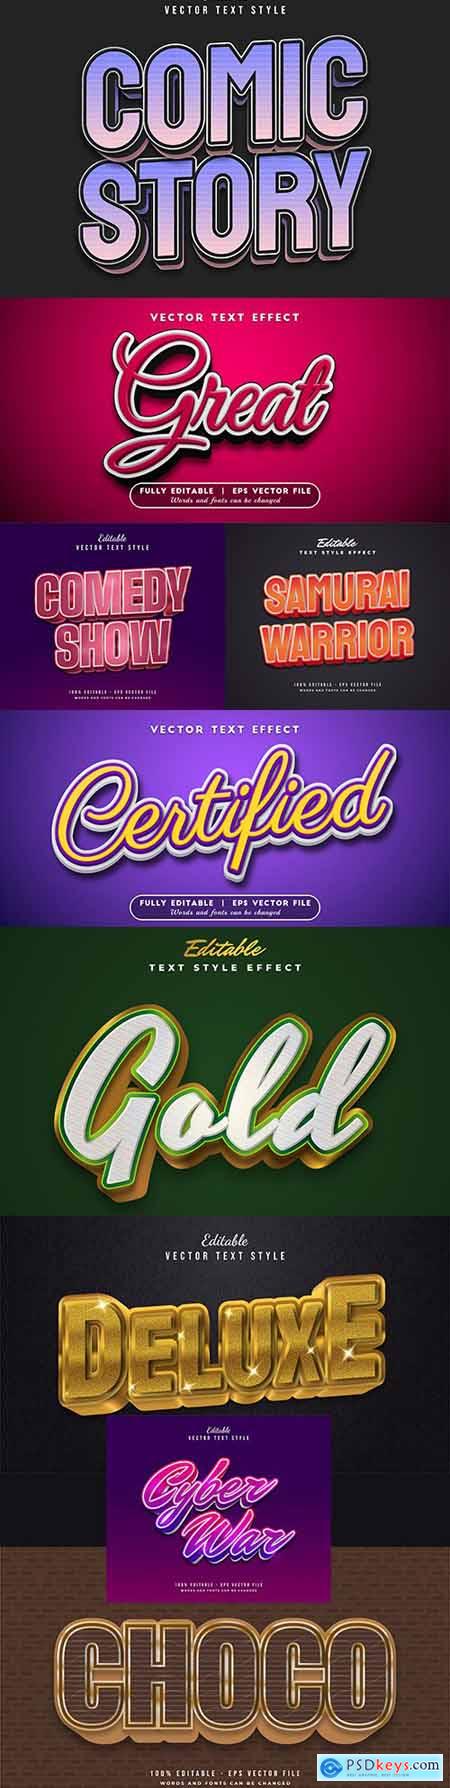 Editable font and 3d effect text design collection illustration 56